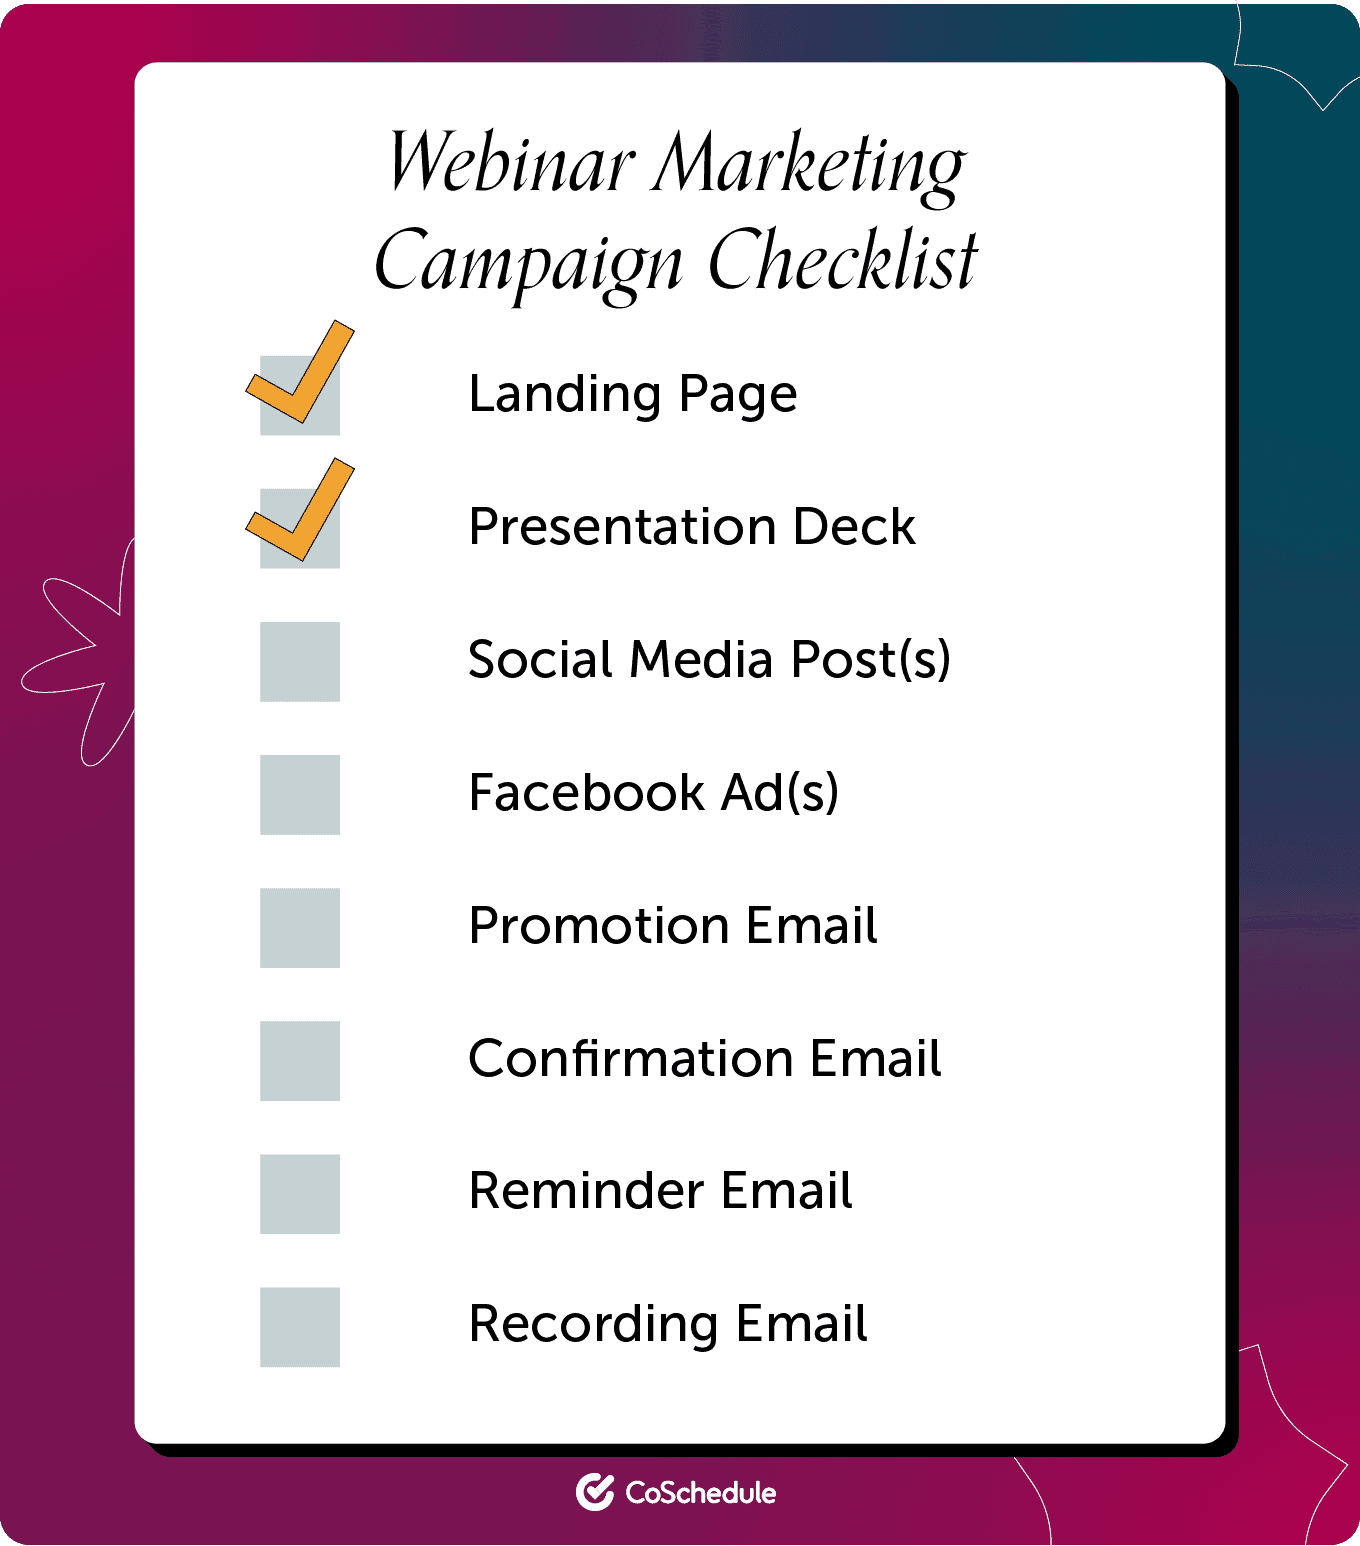 Webinar Marketing Campaign Checklist - Landing page (checked), presentation deck (checked), Social media posts, Facebook ads, Promotion email, confirmation email, reminder email, recording email